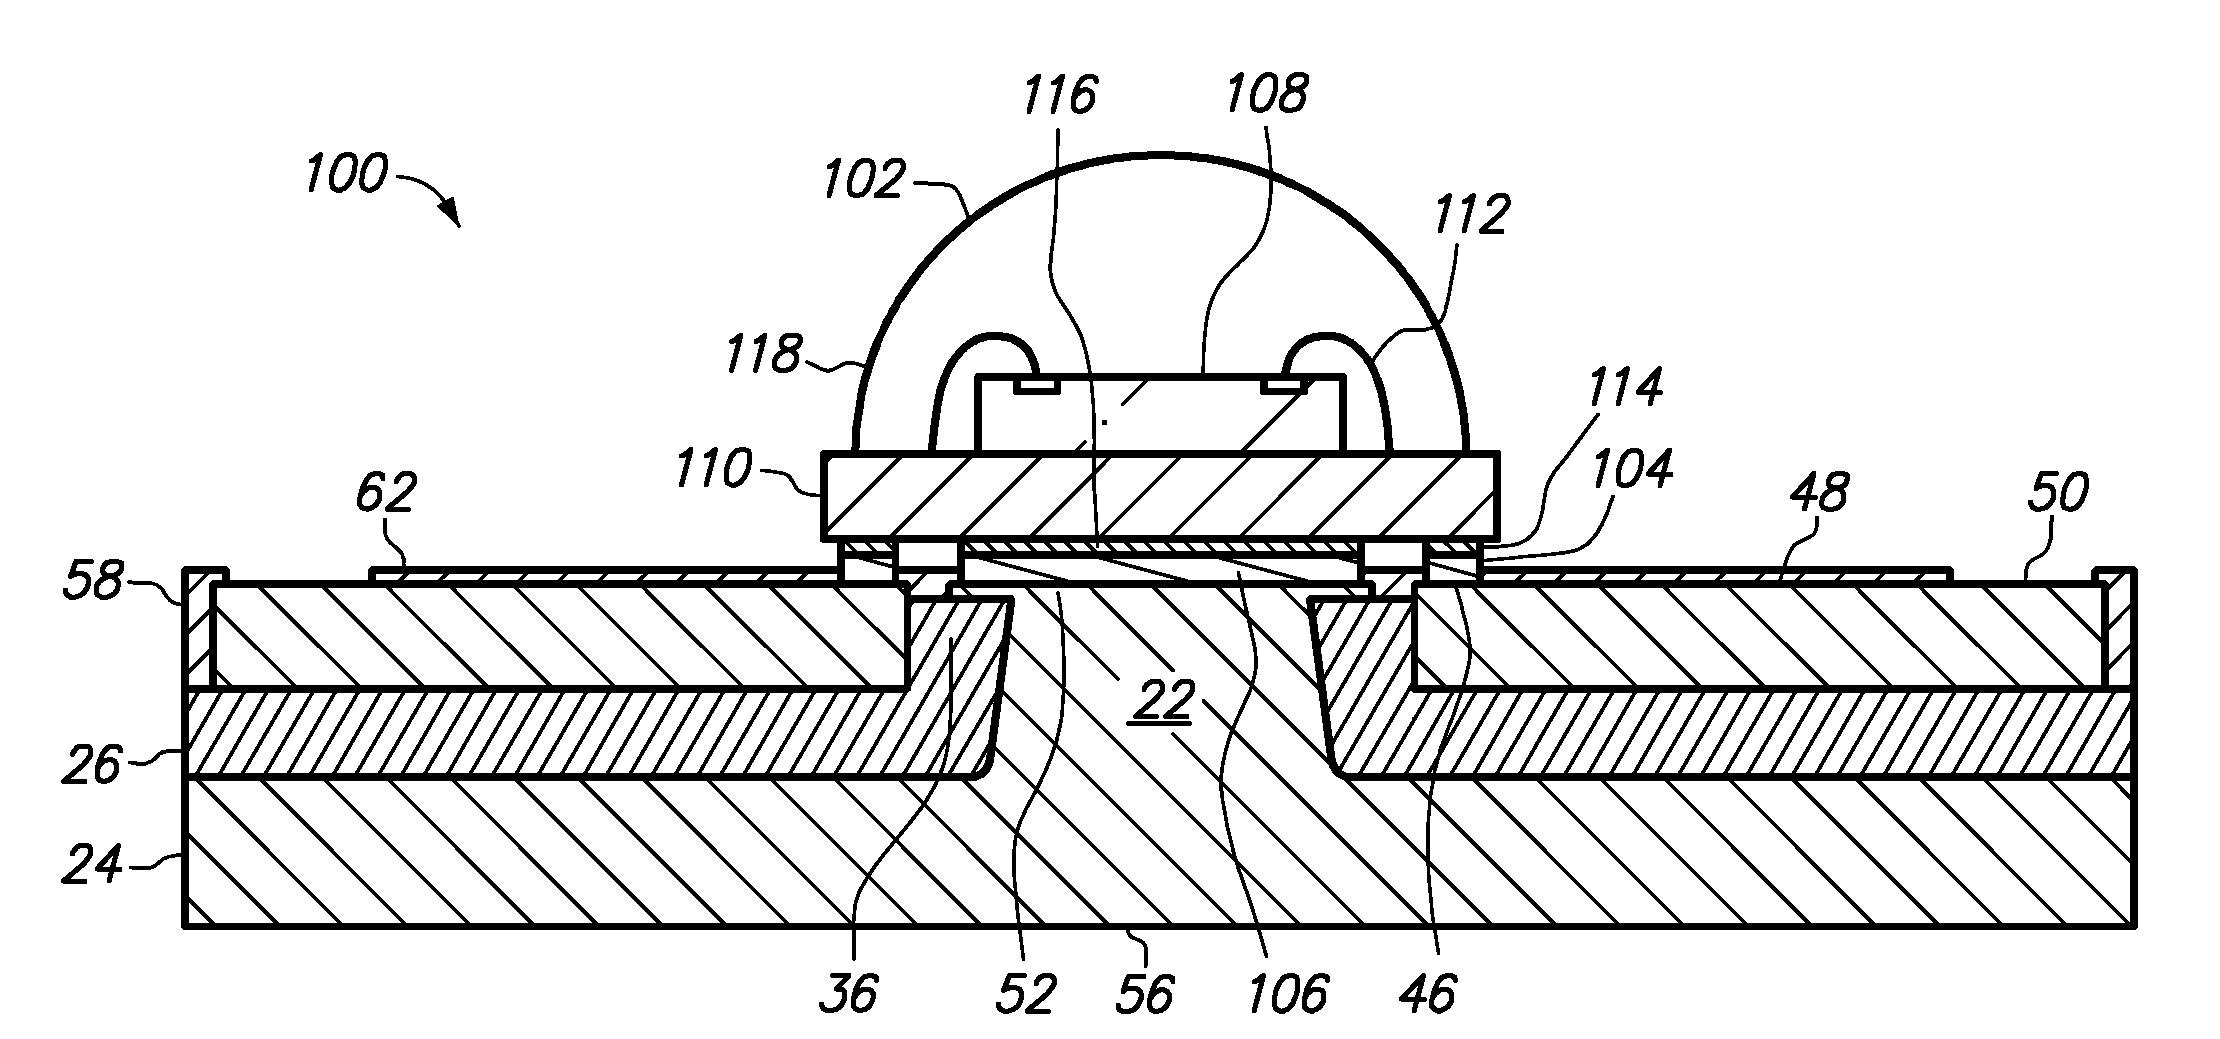 Semiconductor chip assembly with post/base heat spreader and conductive trace